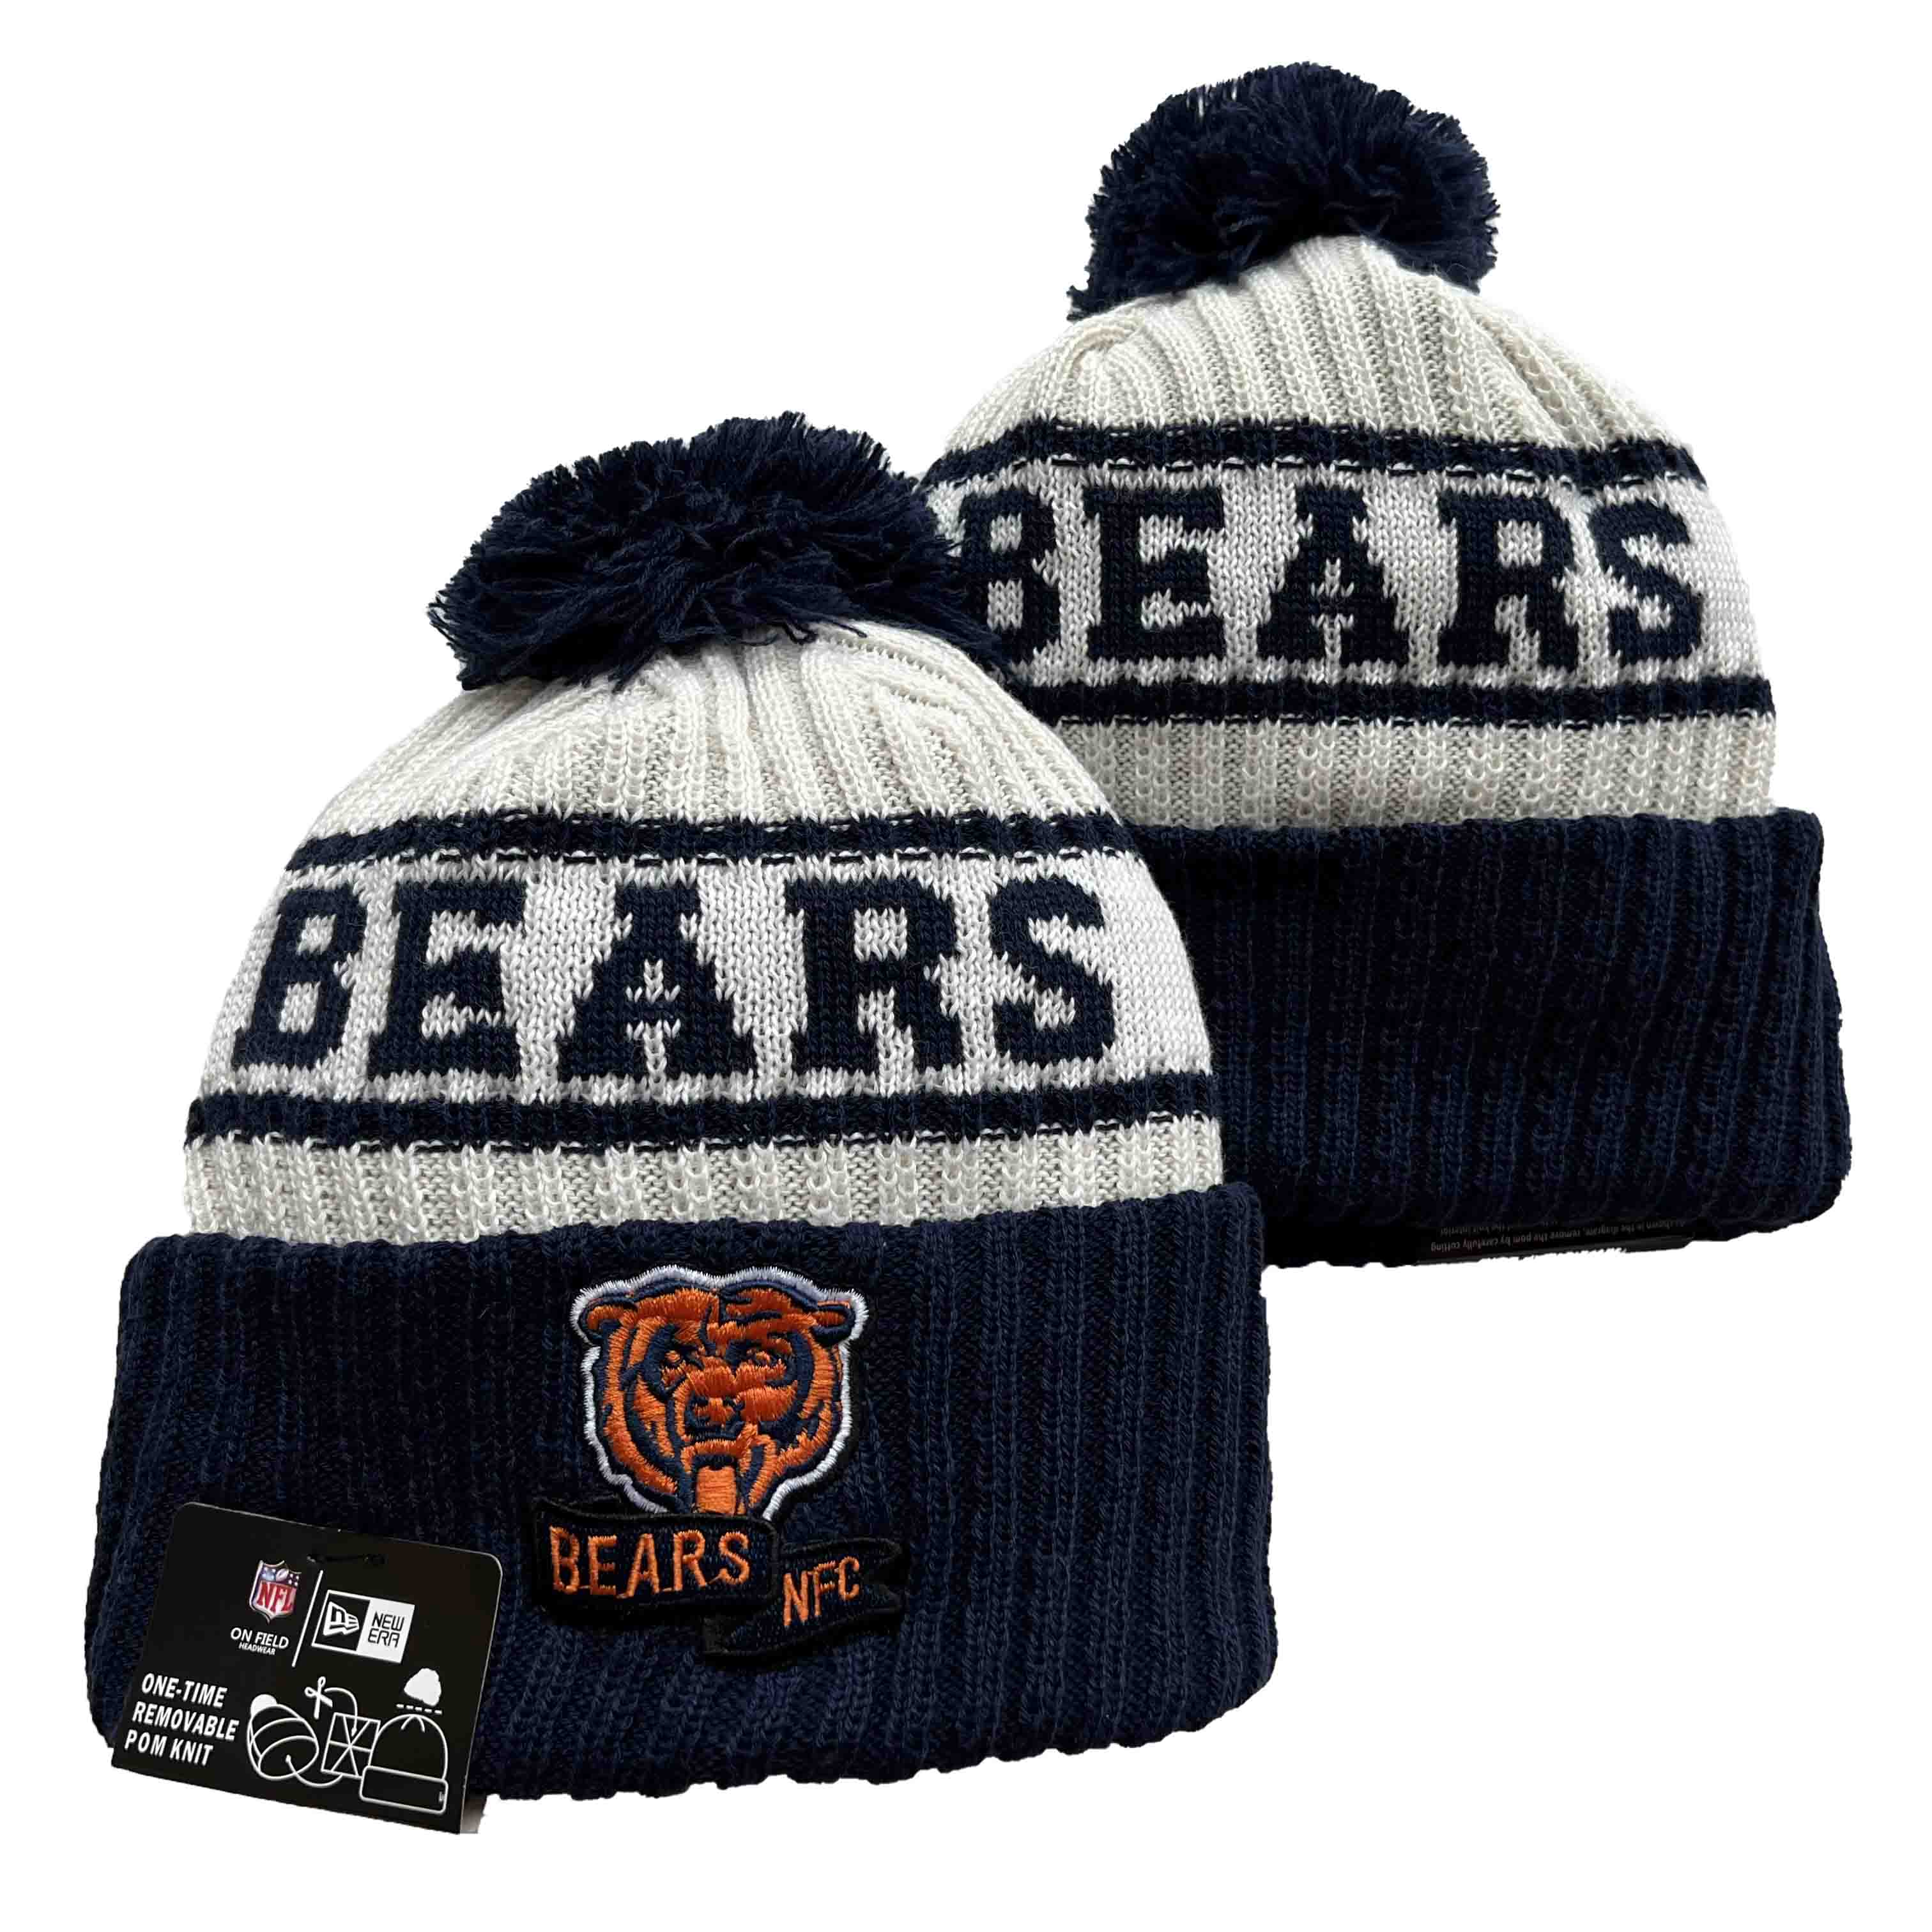 NFL Chicago Bears Beanies Knit Hats-YD891